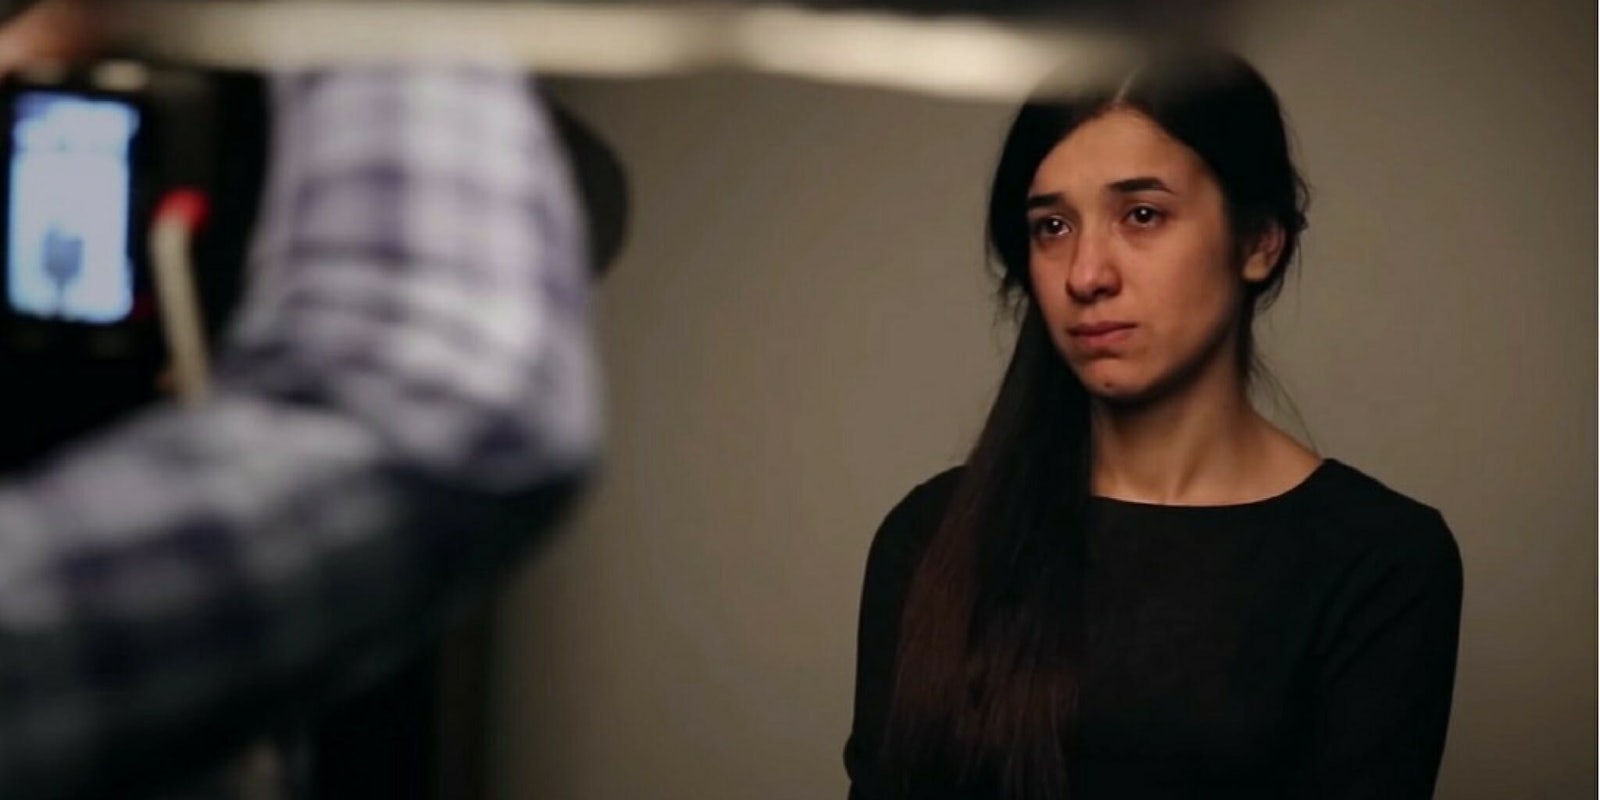 Nadia Murad, a survivor of genocide against the Yazidi people, being photographed.